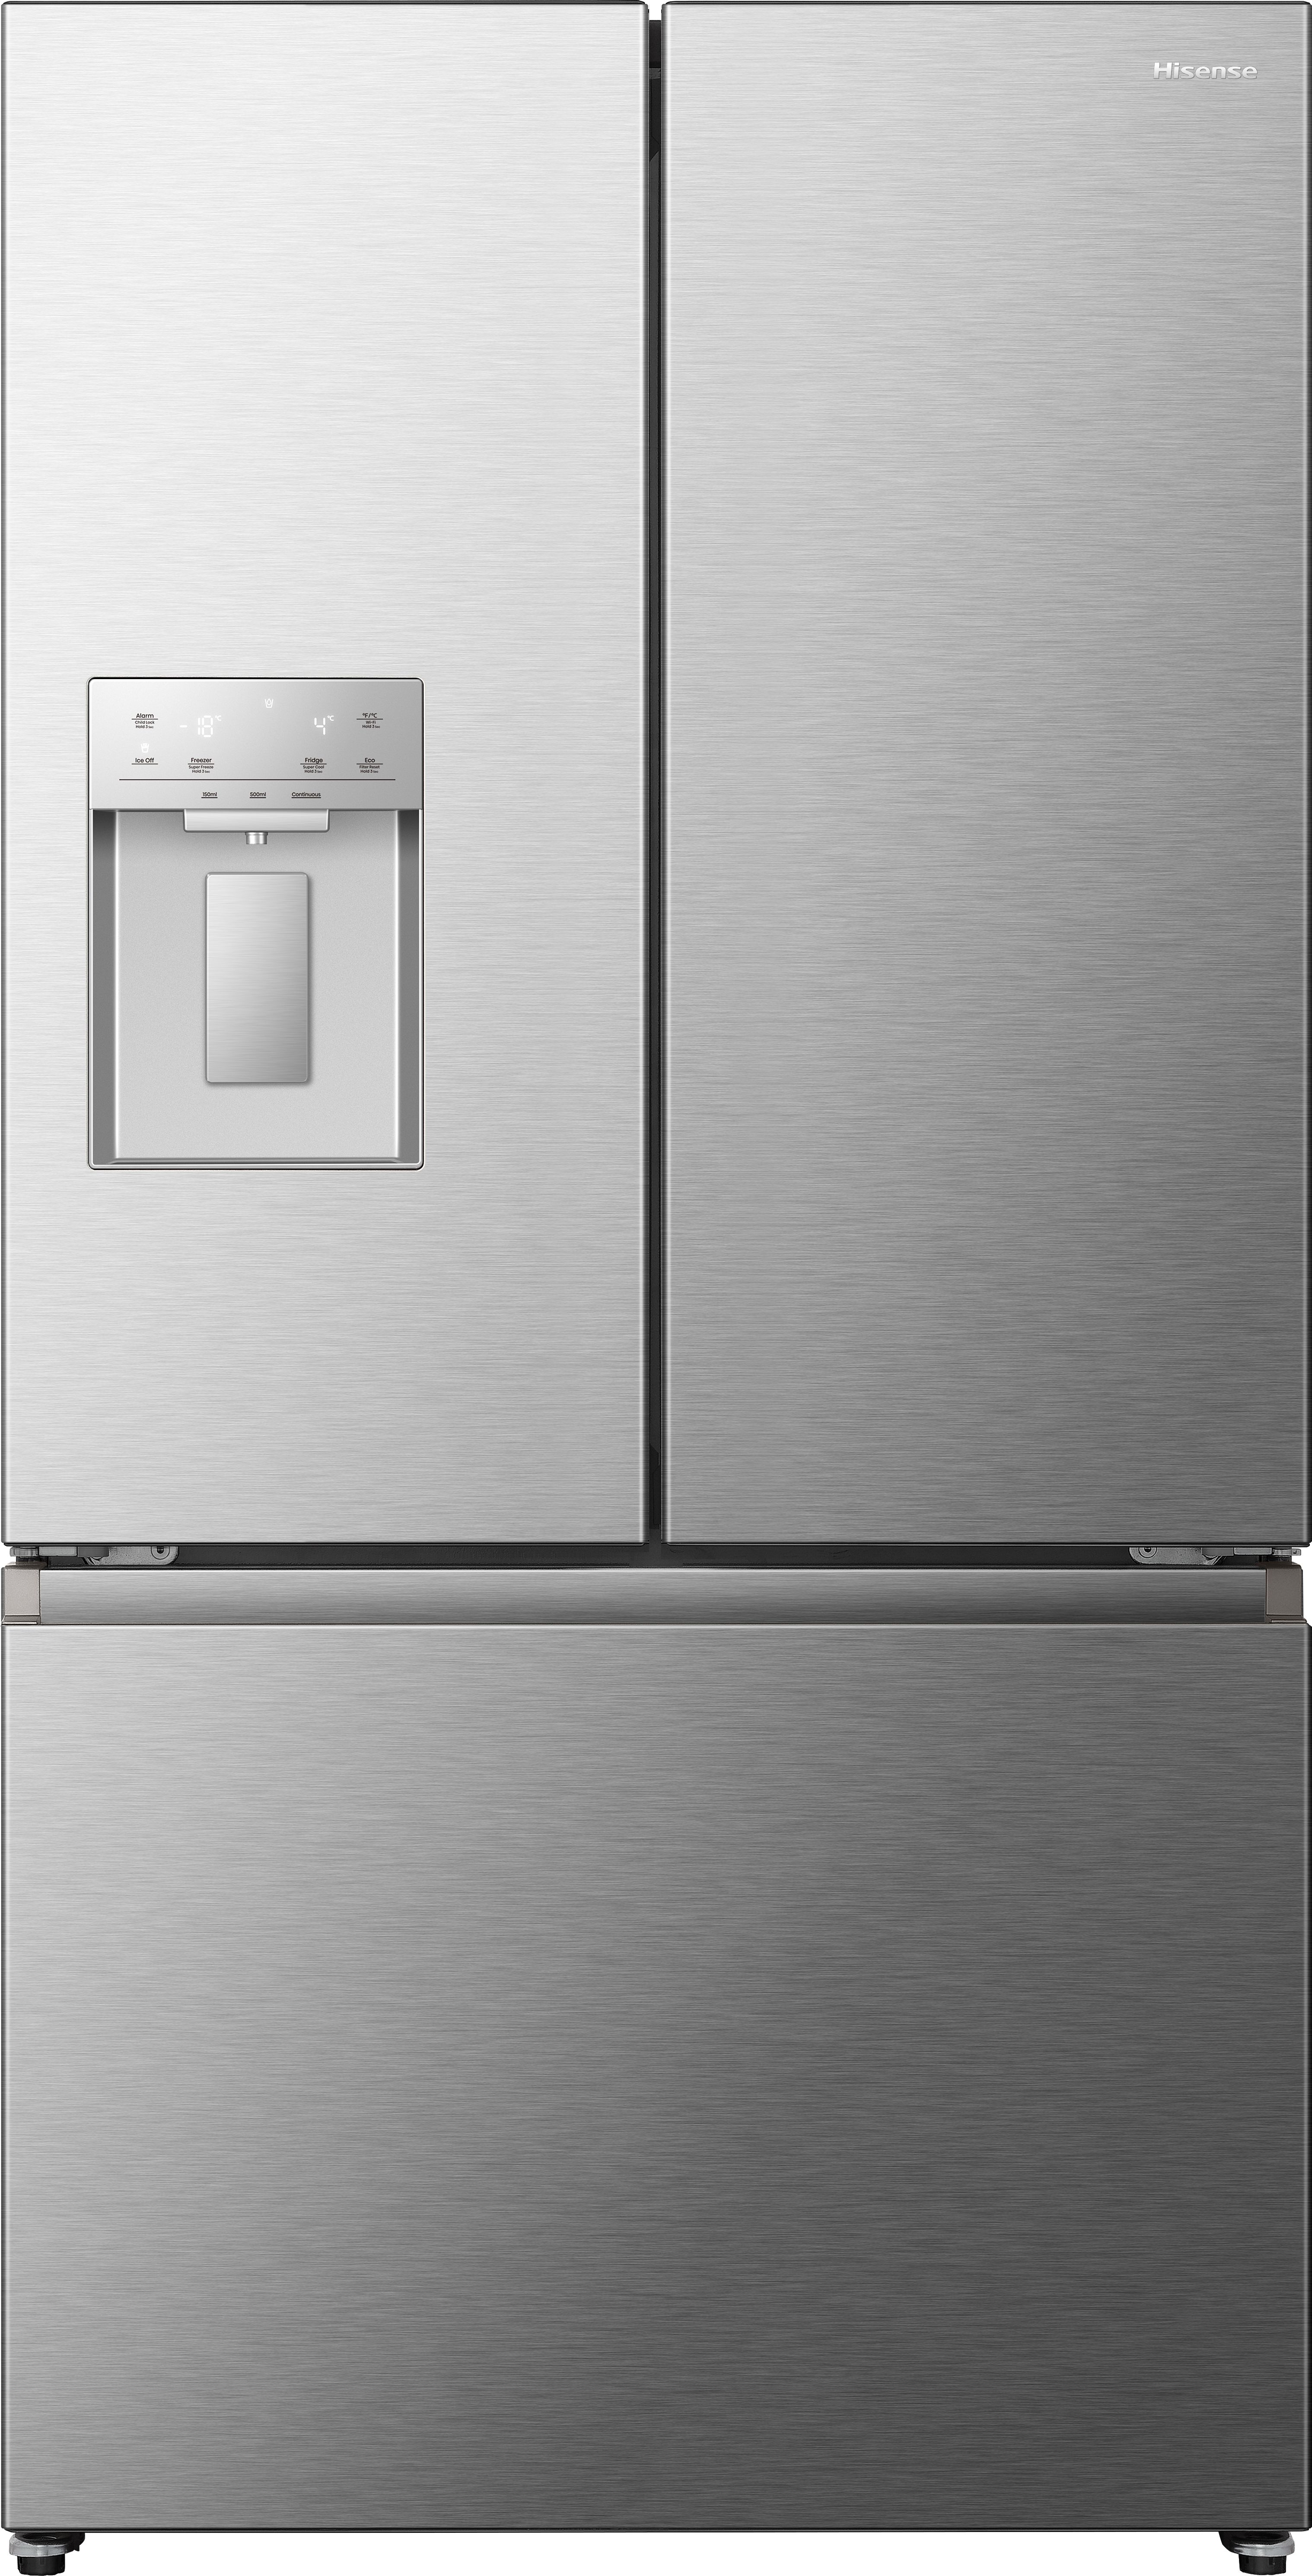 Hisense RF815N4SESE Total No Frost American Fridge Freezer - Stainless Steel - E Rated, Stainless Steel